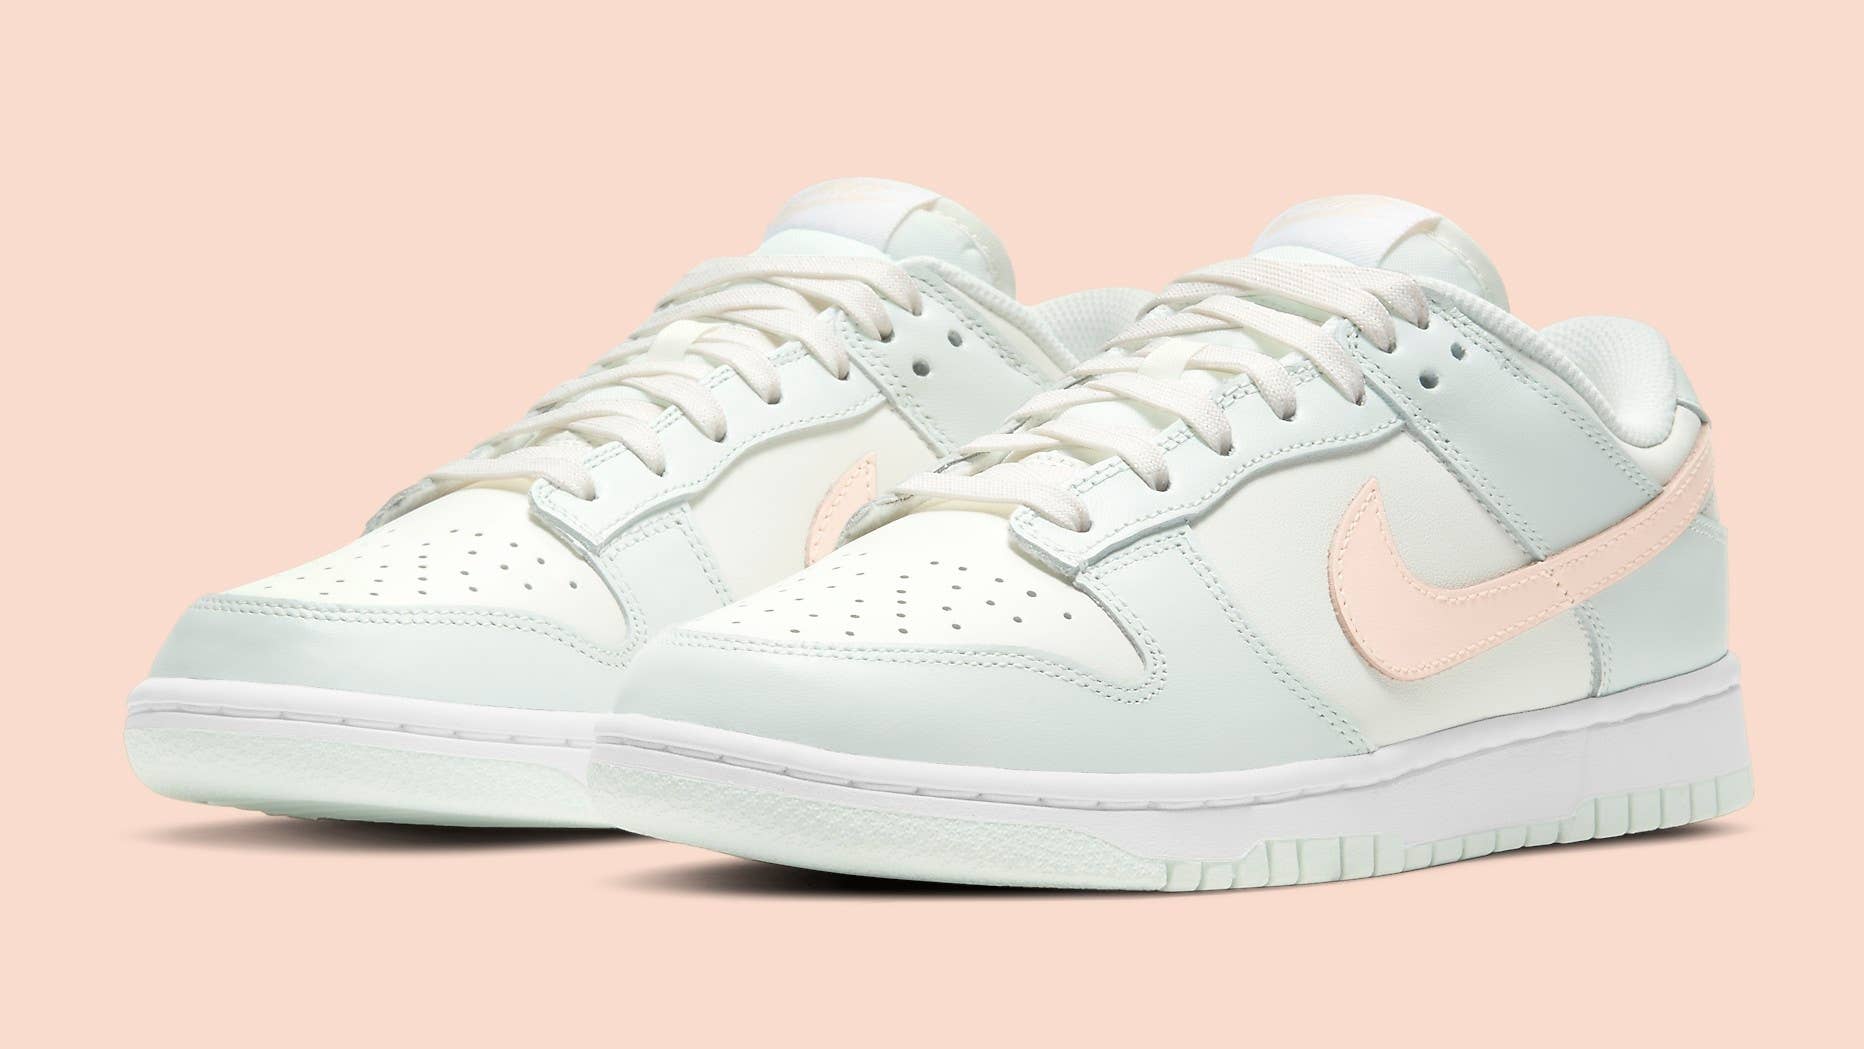 Nike Dunk Low Women's 'Barely Green' DD1503-104 Pair